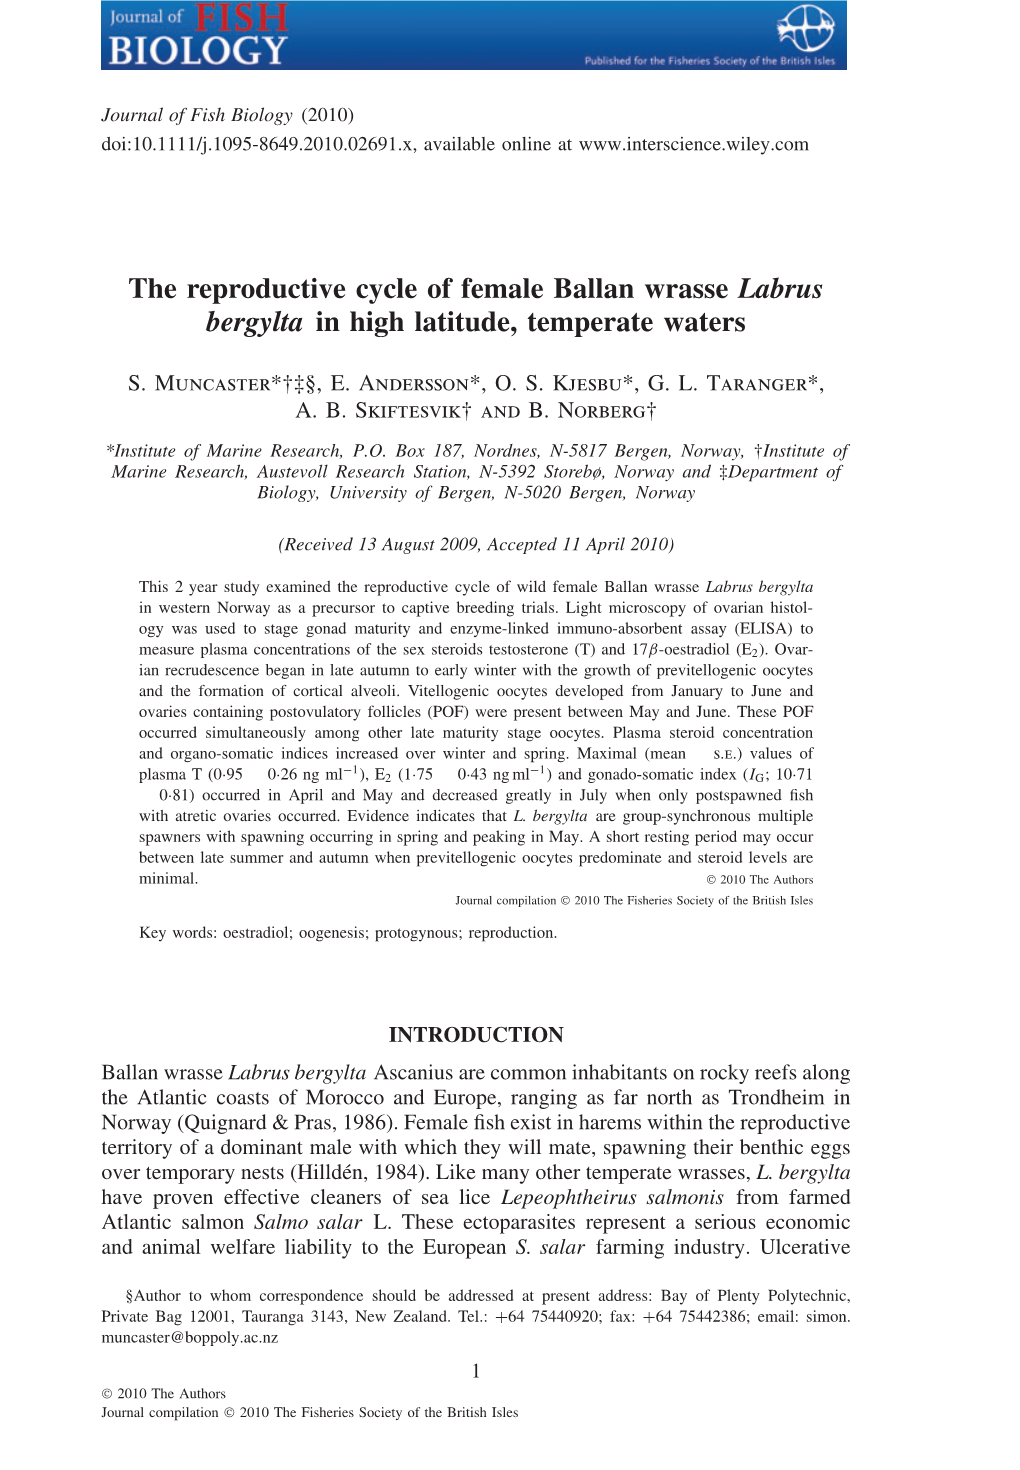 The Reproductive Cycle of Female Ballan Wrasse Labrus Bergylta in High Latitude, Temperate Waters